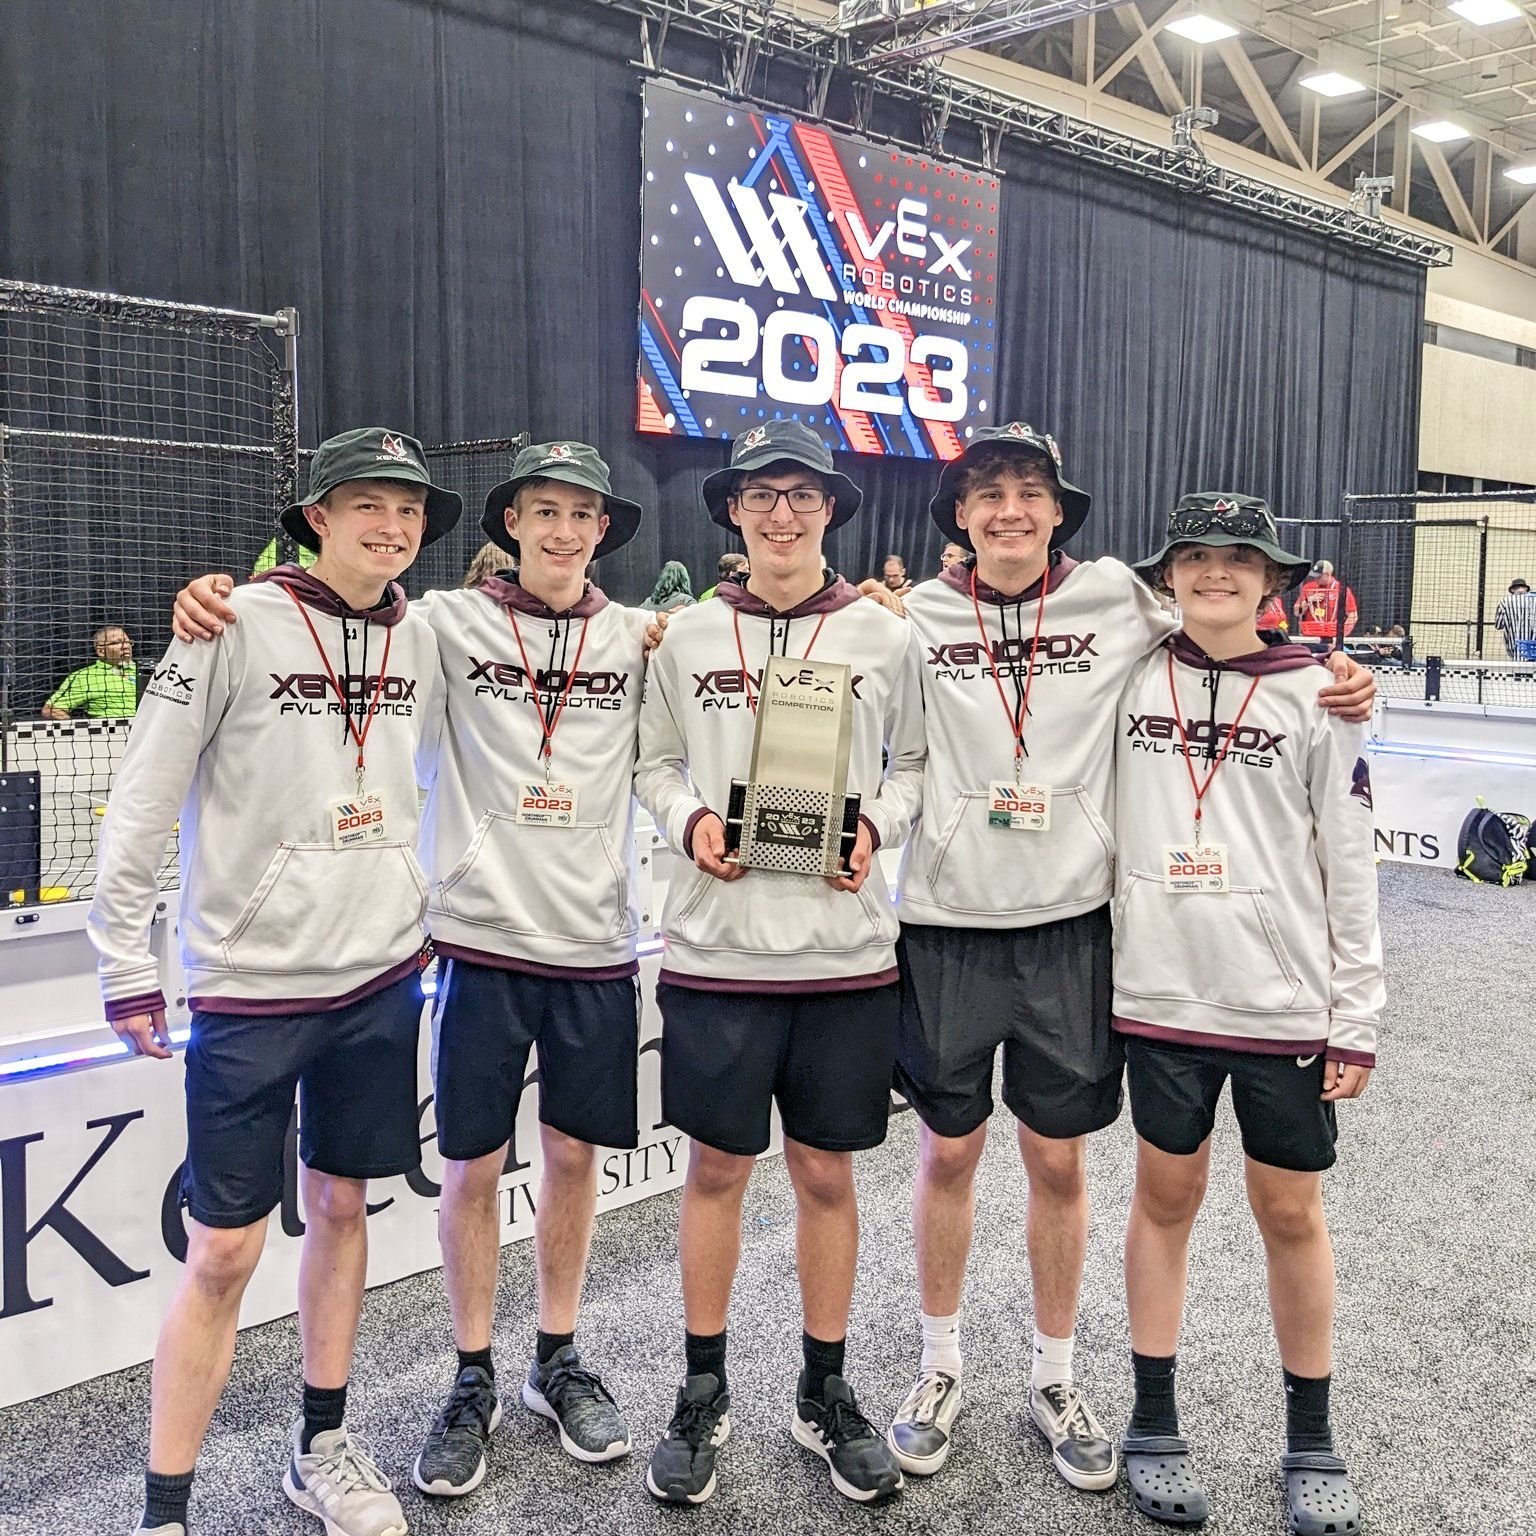 Five members of the VEX team, holding their trophy